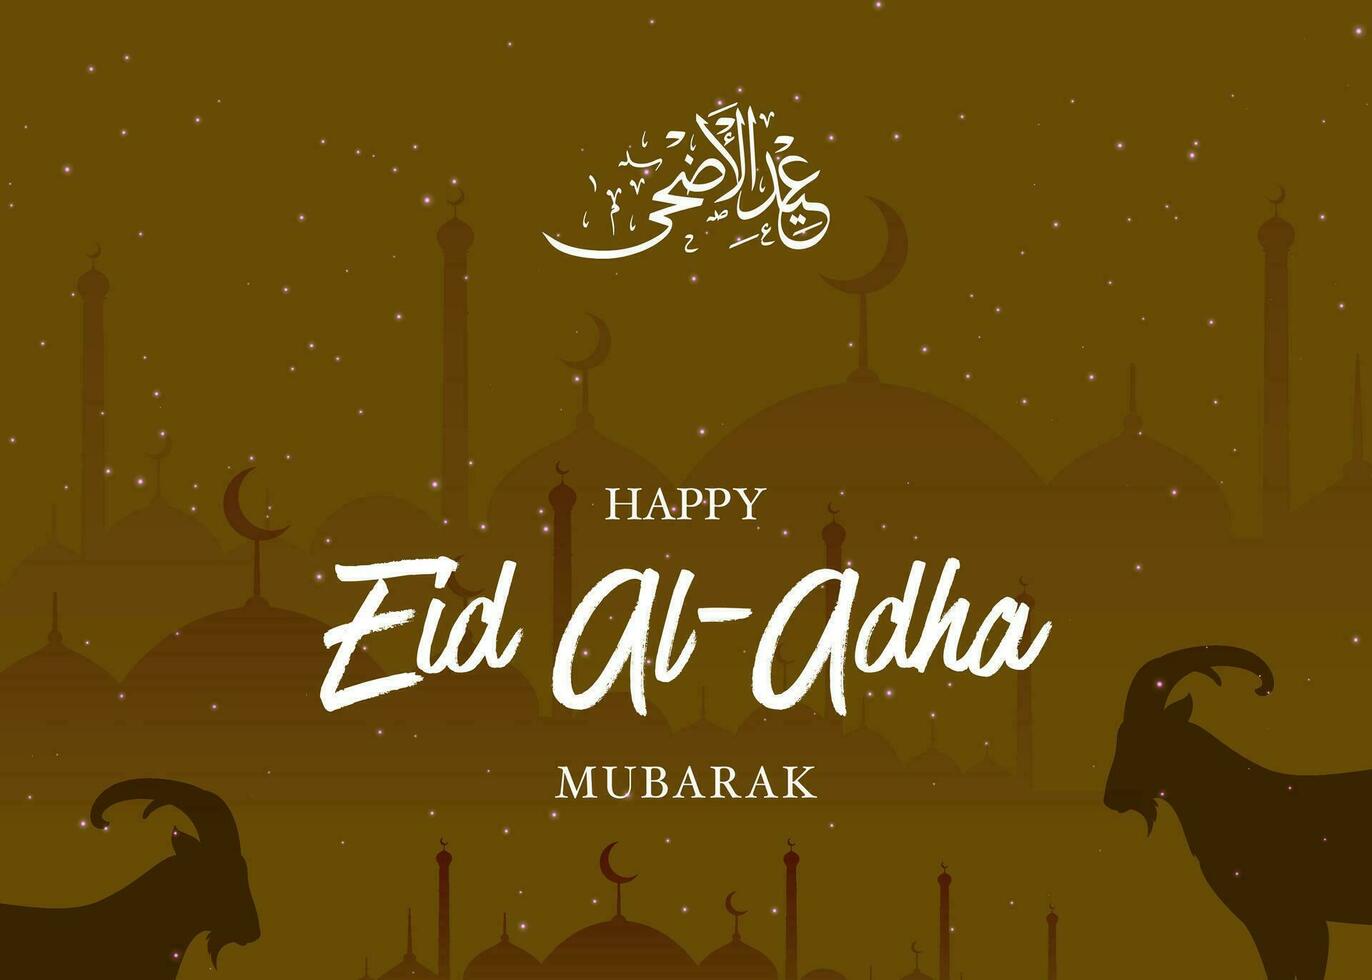 Eid al adha mubarak islamic and moslem background social media design with stars moon, mosque and a goat background , poster, banner design, vector illustration